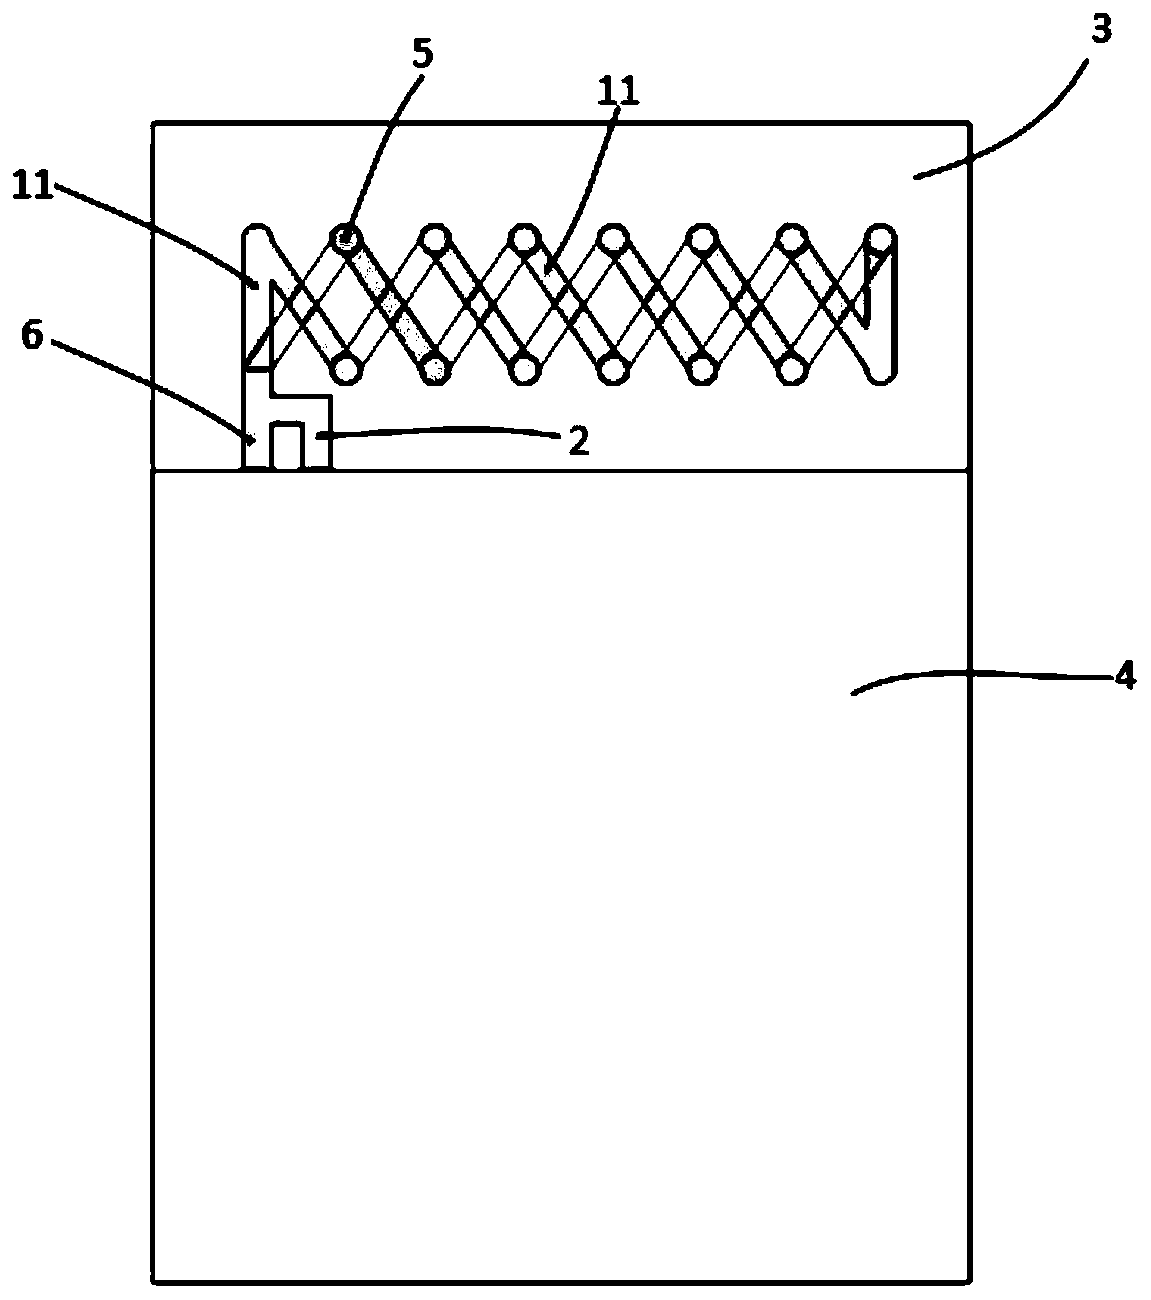 Double-frequency PCB helical antenna